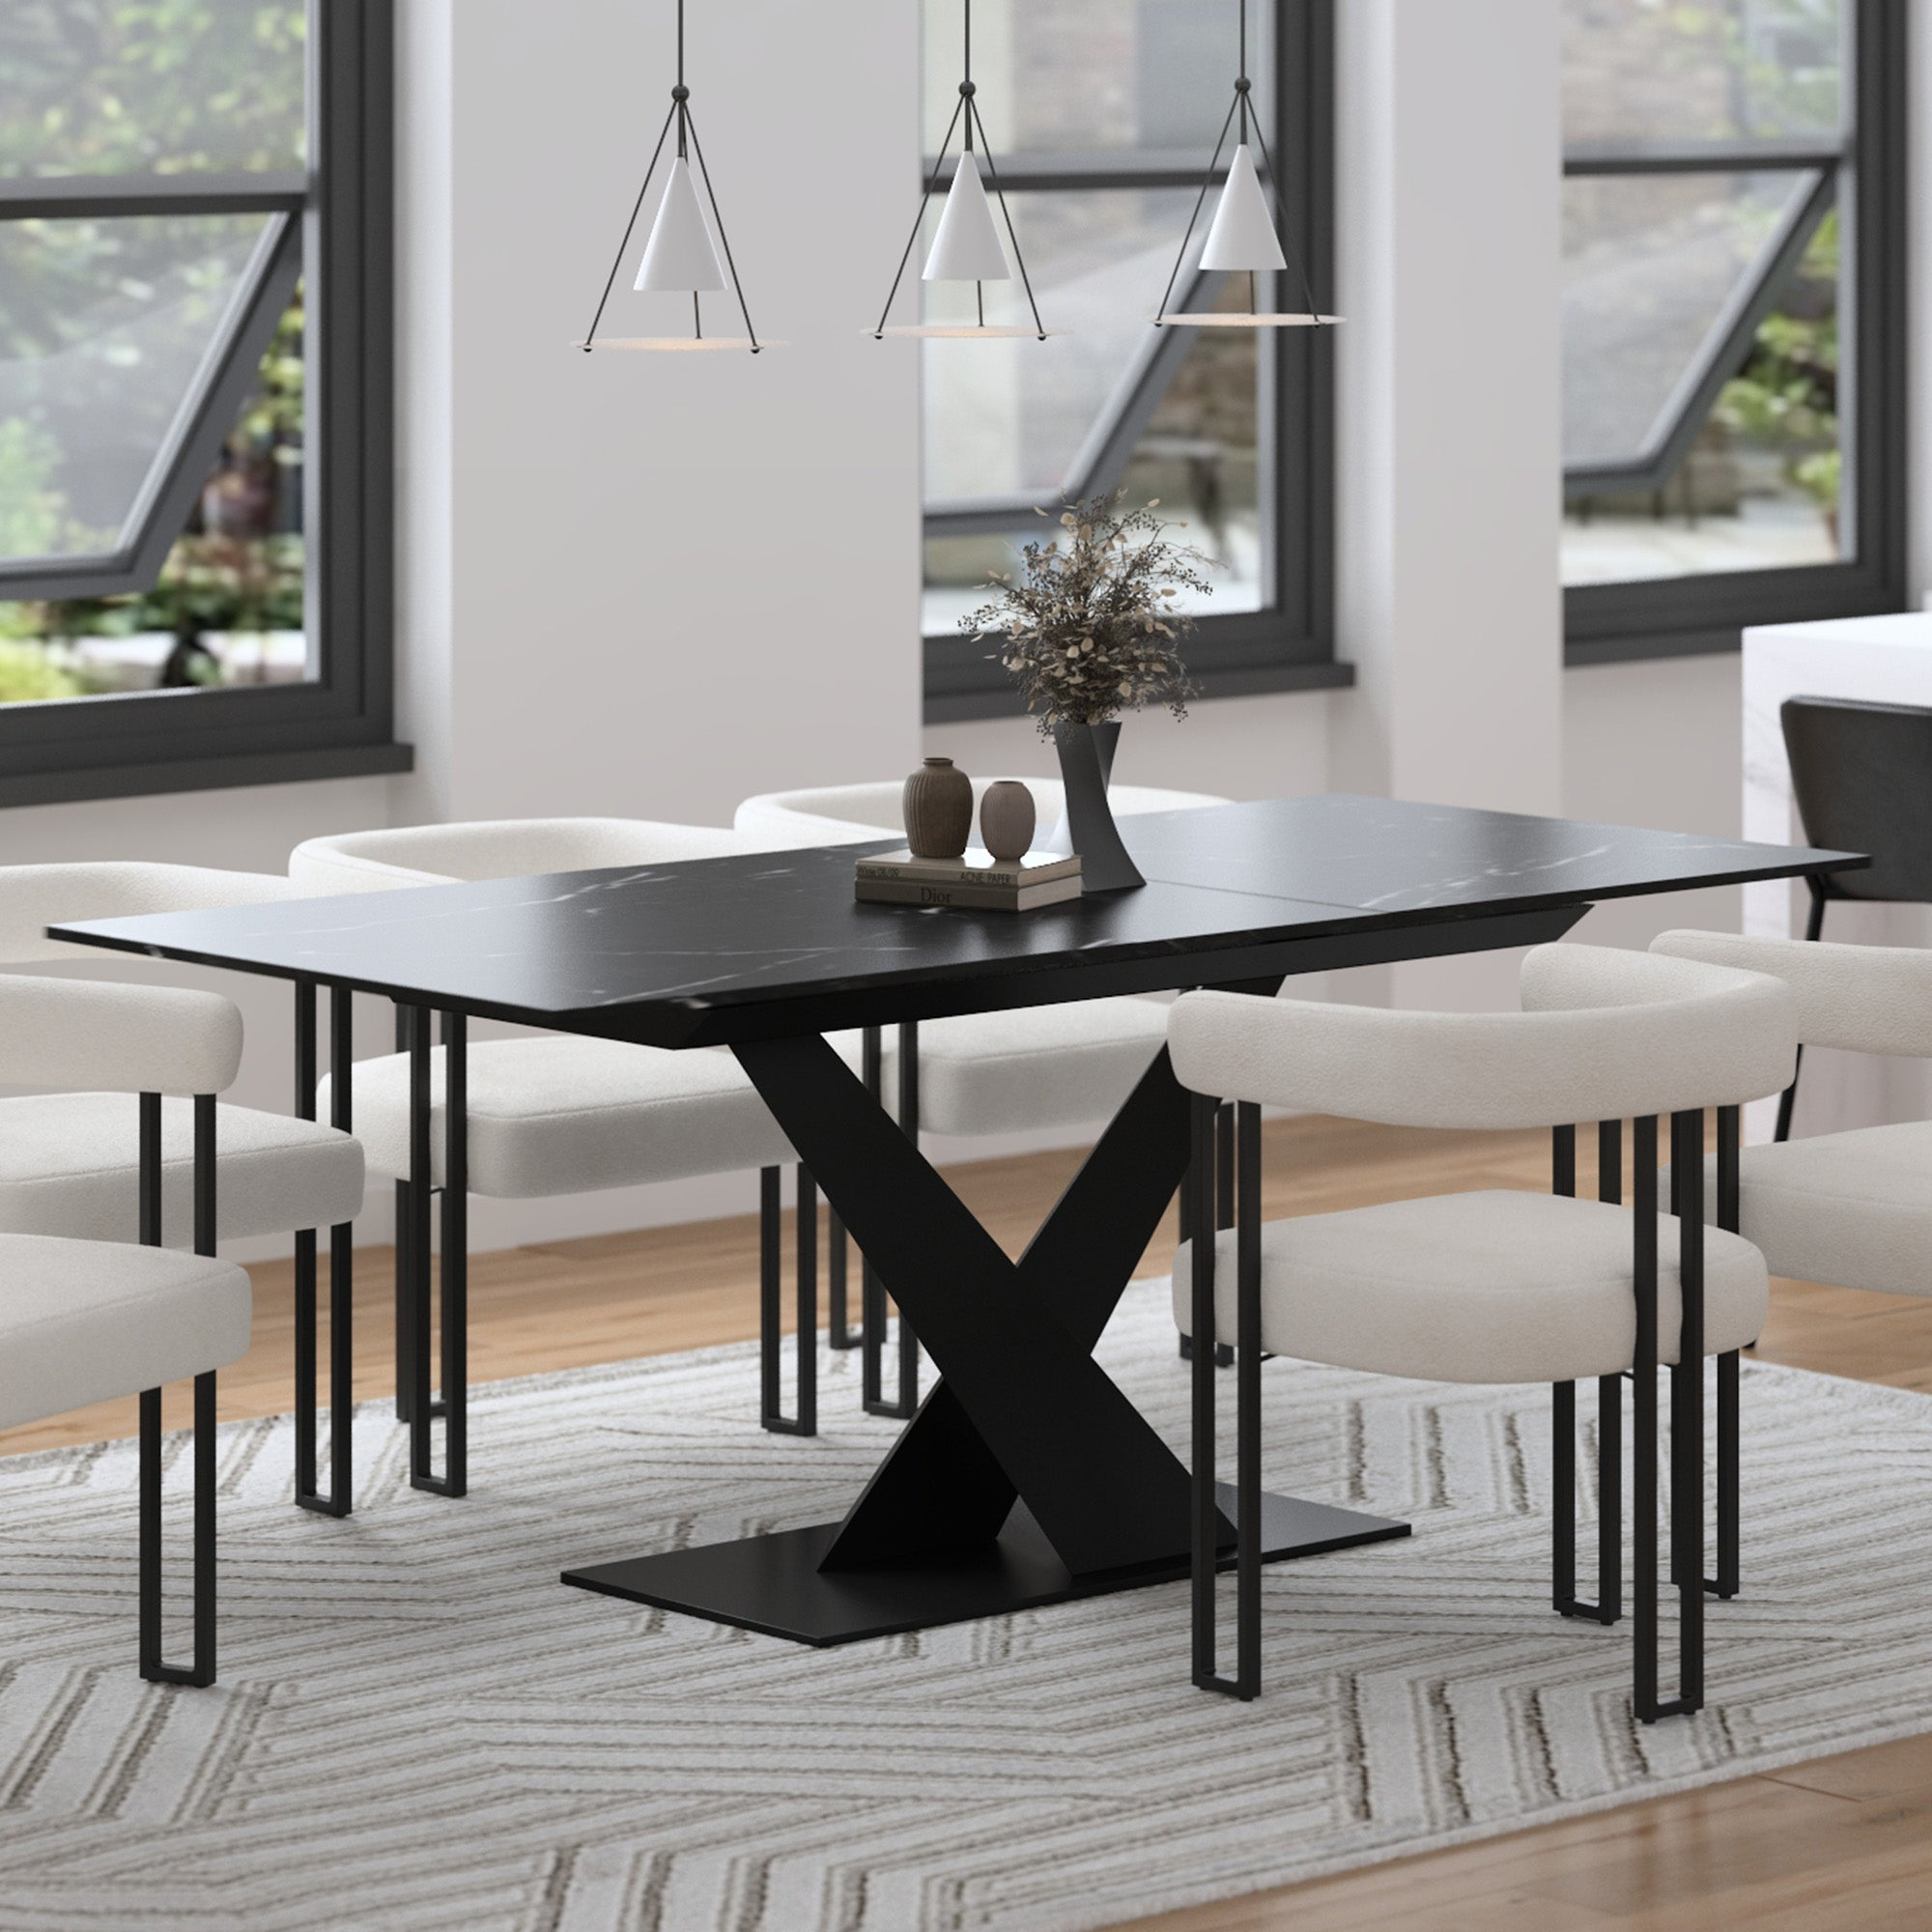 A stylish and modern dining chair in a Canadian kitchen